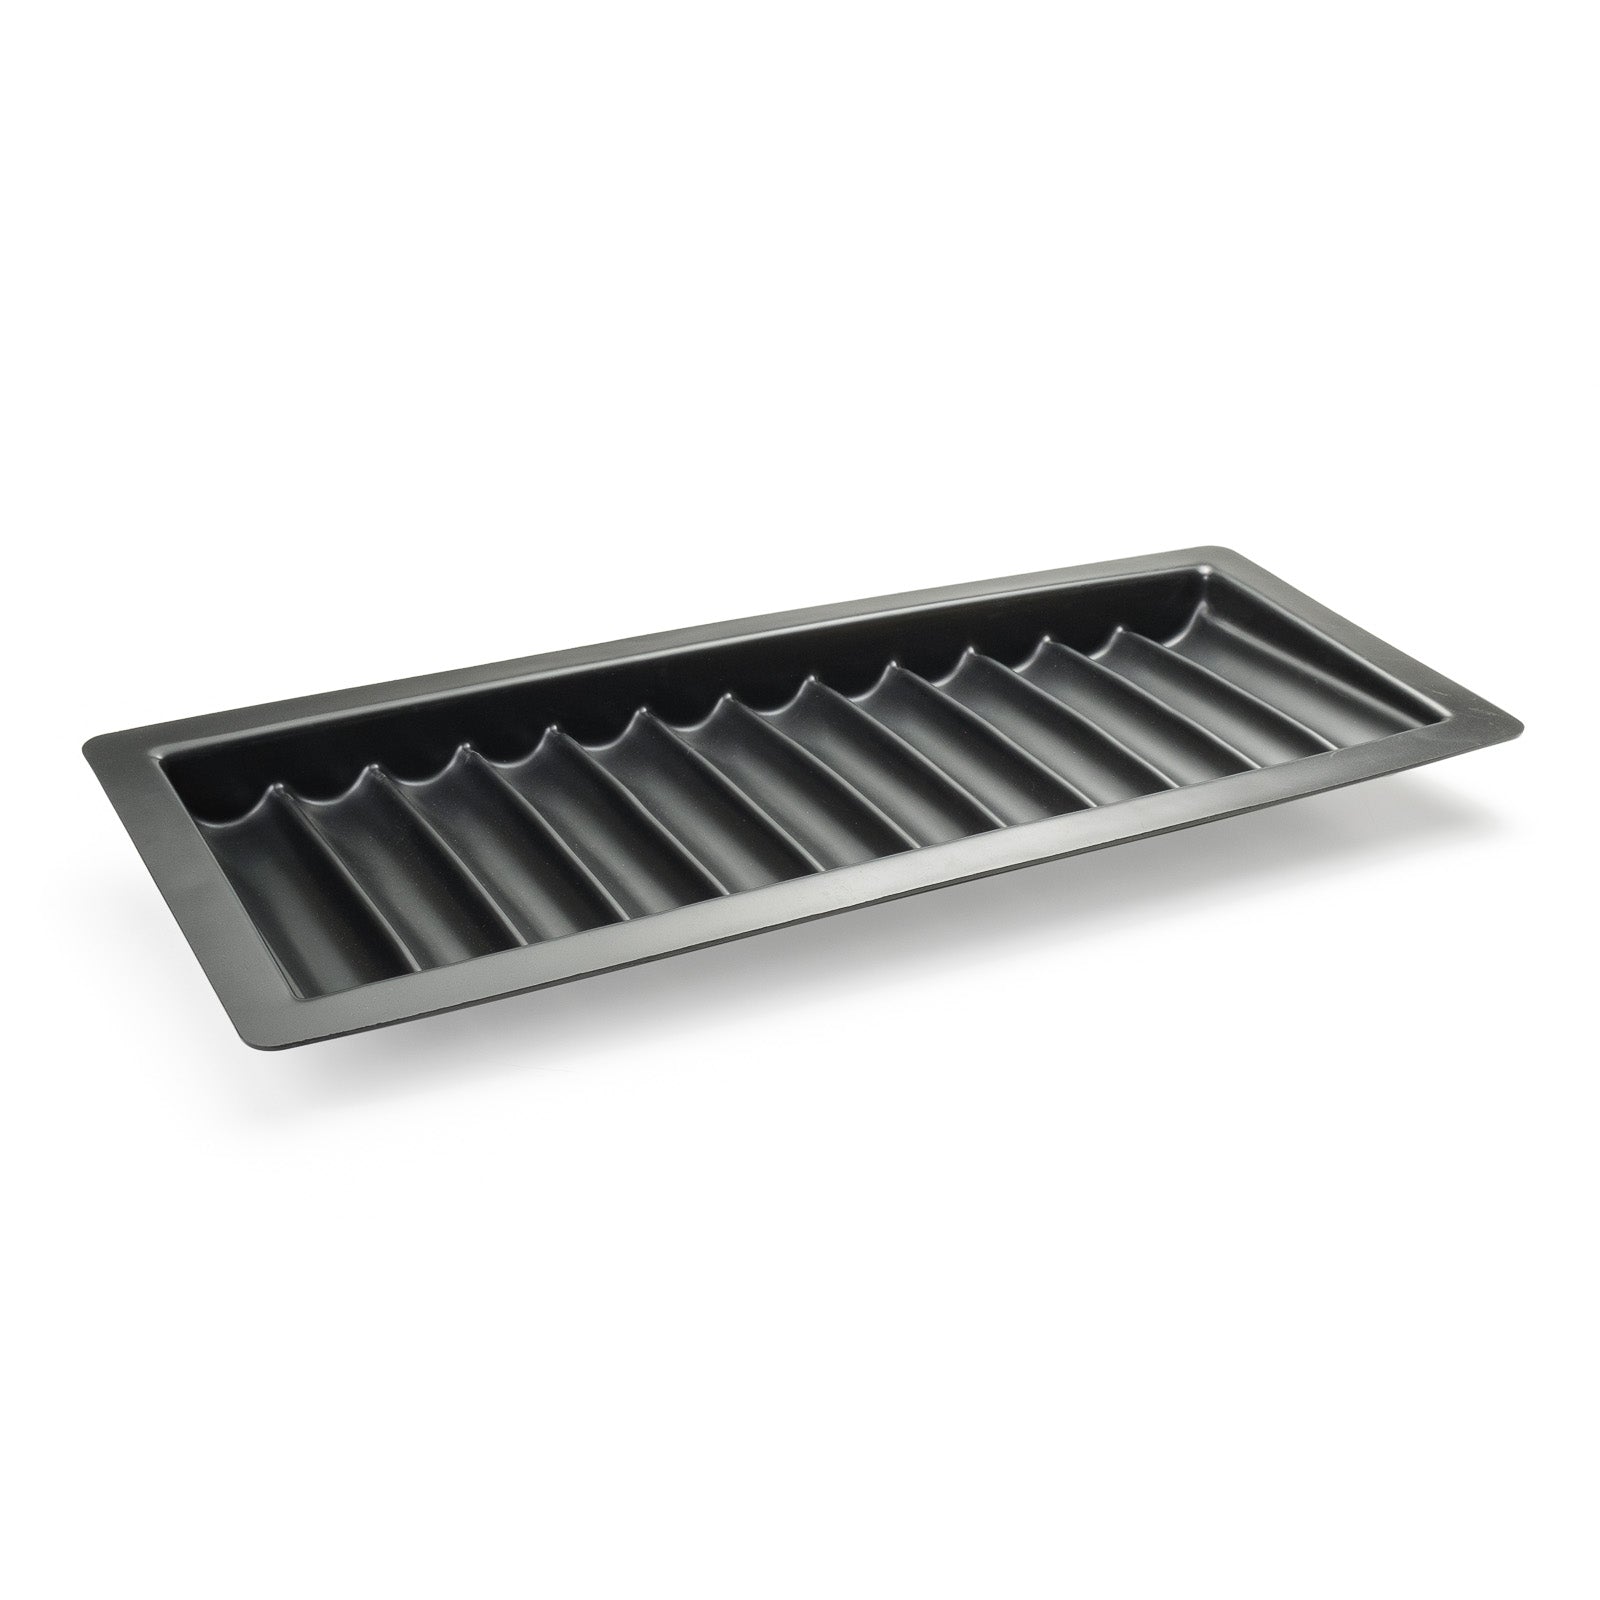 ABS Black Poker Chip Tray (12 Row / 600 Chip)